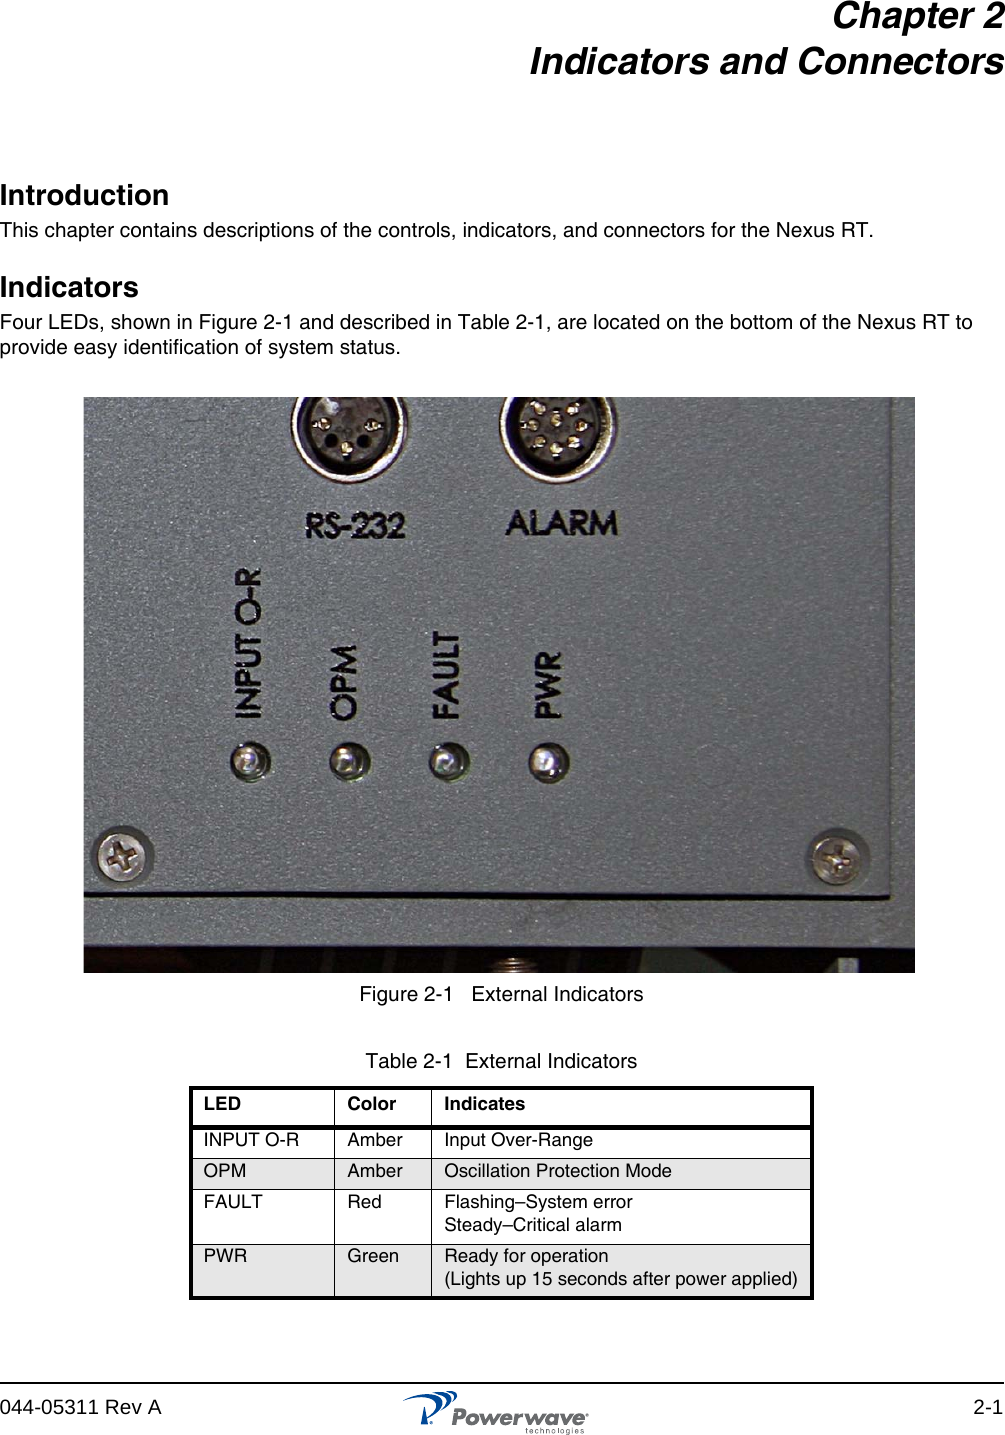 044-05311 Rev A 2-1Chapter 2 Indicators and Connectors IntroductionThis chapter contains descriptions of the controls, indicators, and connectors for the Nexus RT. IndicatorsFour LEDs, shown in Figure 2-1 and described in Table 2-1, are located on the bottom of the Nexus RT to provide easy identification of system status.Figure 2-1   External IndicatorsTable 2-1  External IndicatorsLED Color IndicatesINPUT O-R Amber Input Over-RangeOPM Amber Oscillation Protection ModeFAULT Red Flashing–System errorSteady–Critical alarmPWR Green Ready for operation (Lights up 15 seconds after power applied)